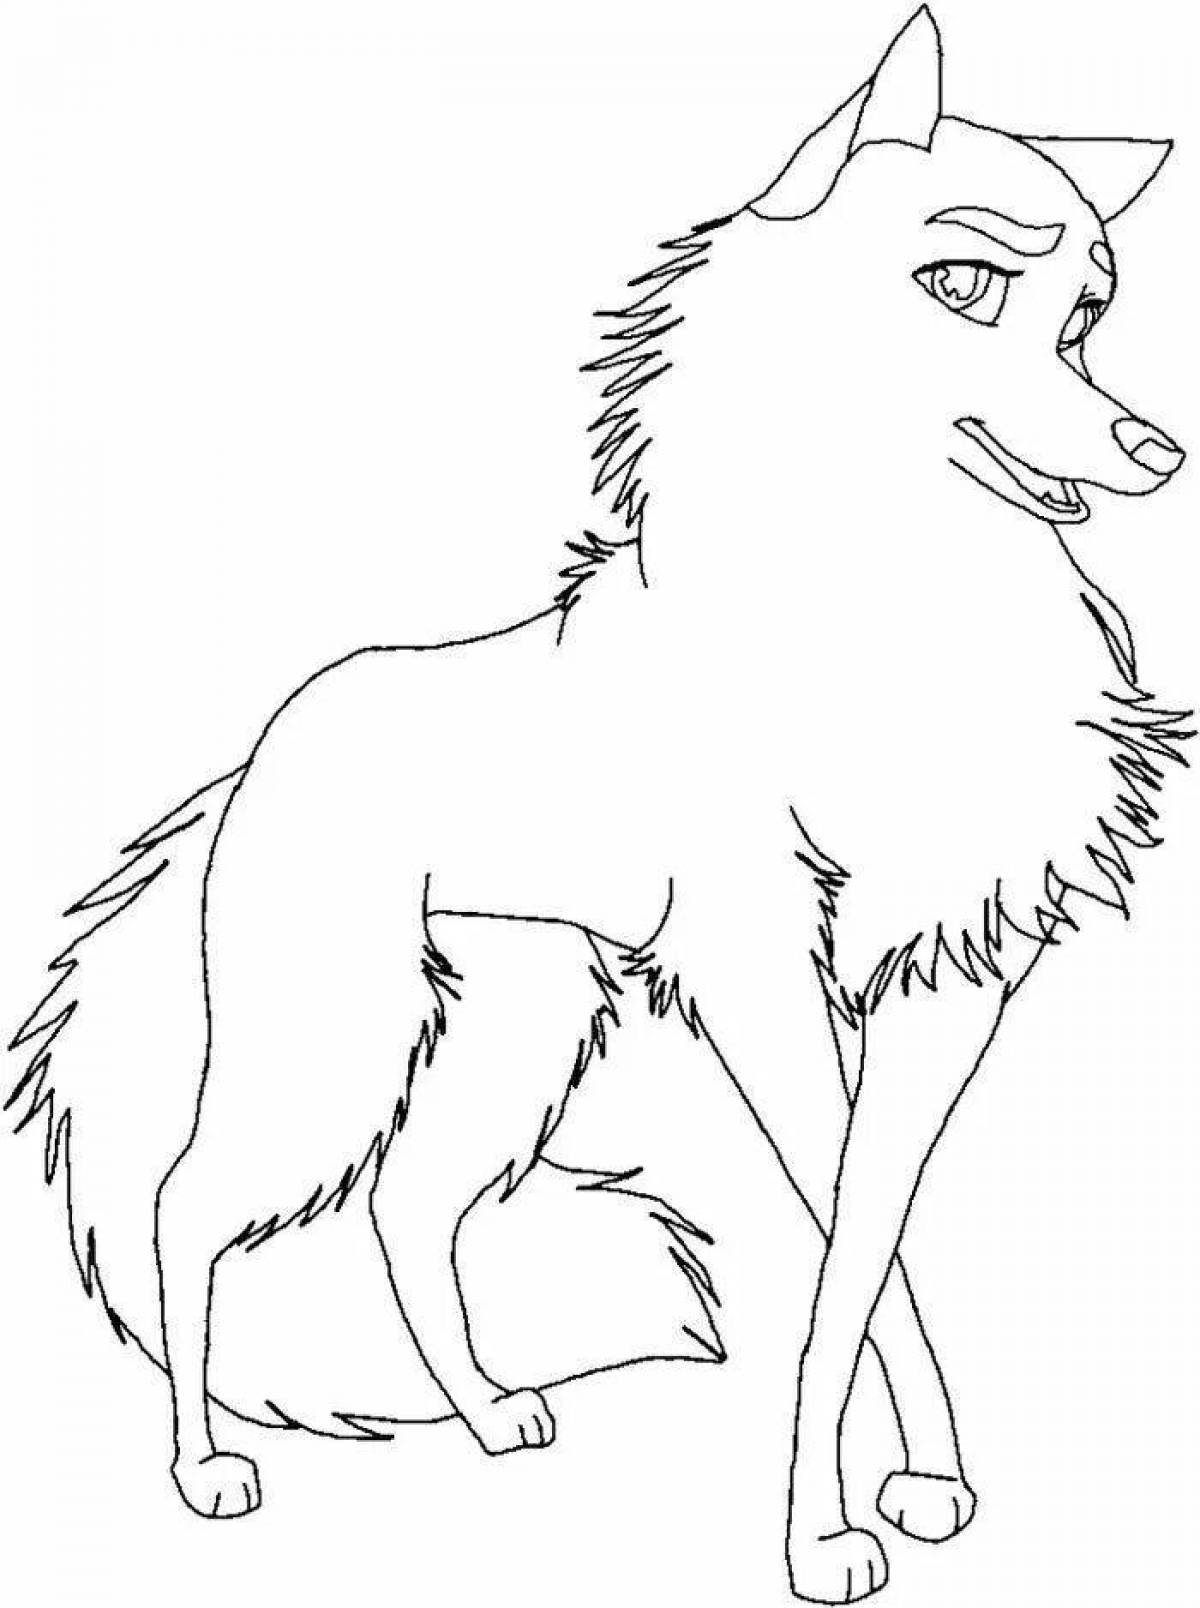 Coloring page powerful she-wolf